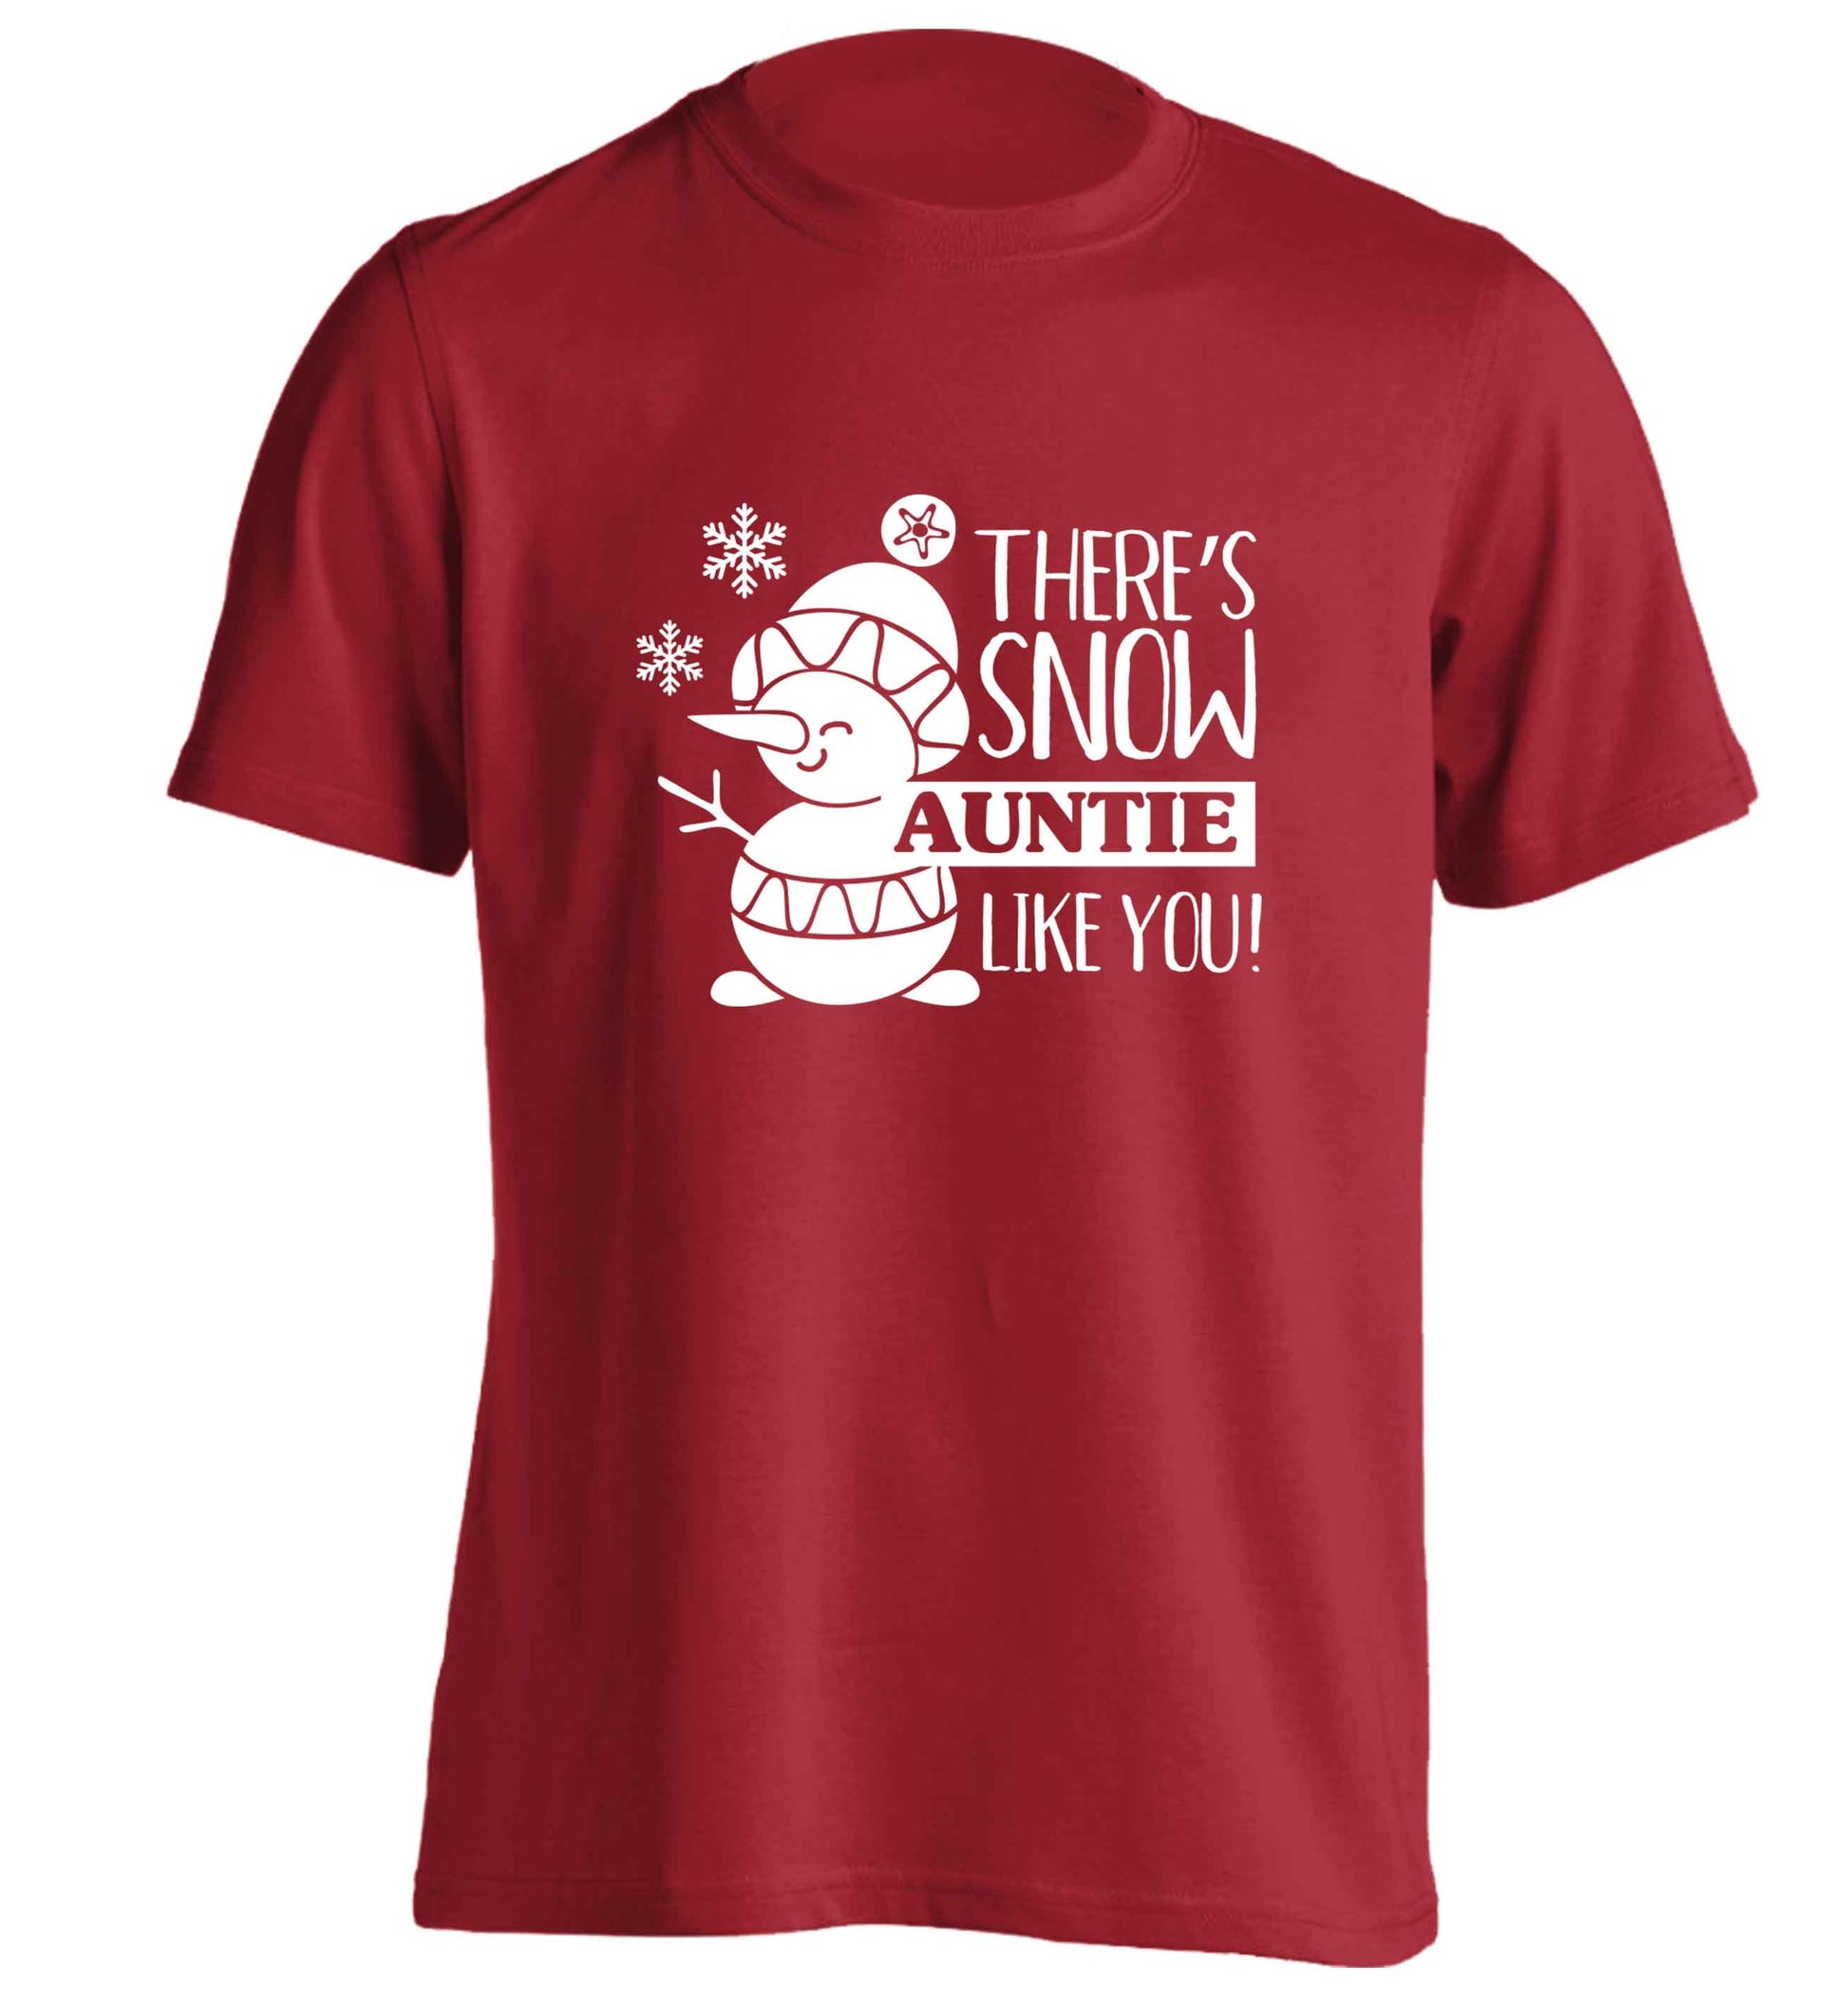 There's snow auntie like you adults unisex red Tshirt 2XL